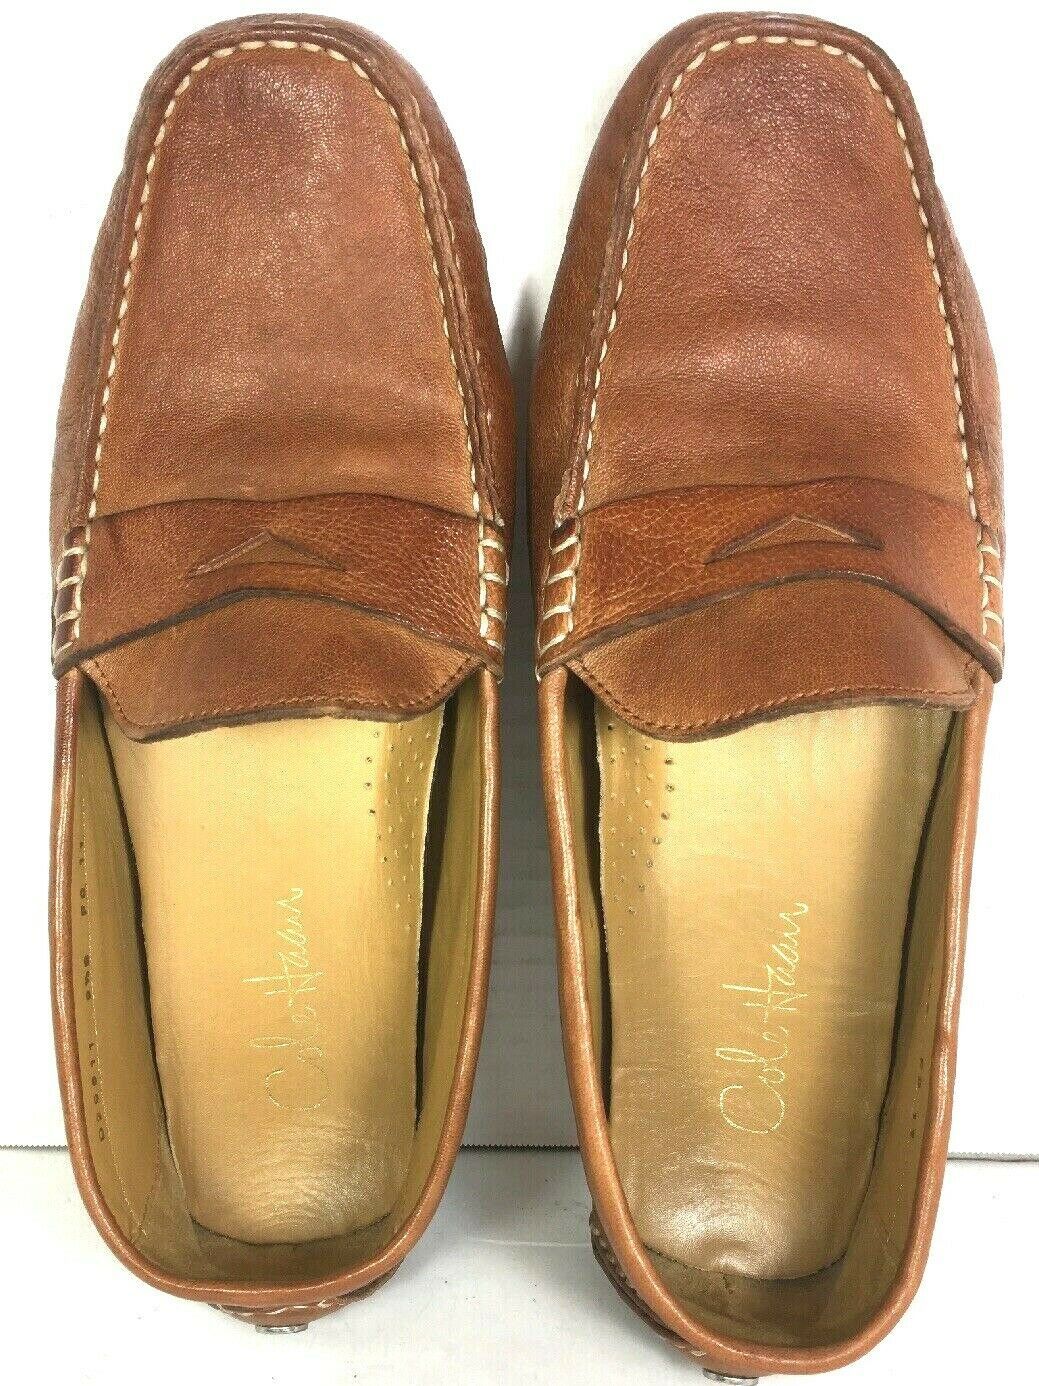 Cole Haan Brown Leather Loafers Driving Shoes Mens US 9.5 B Narrow ...